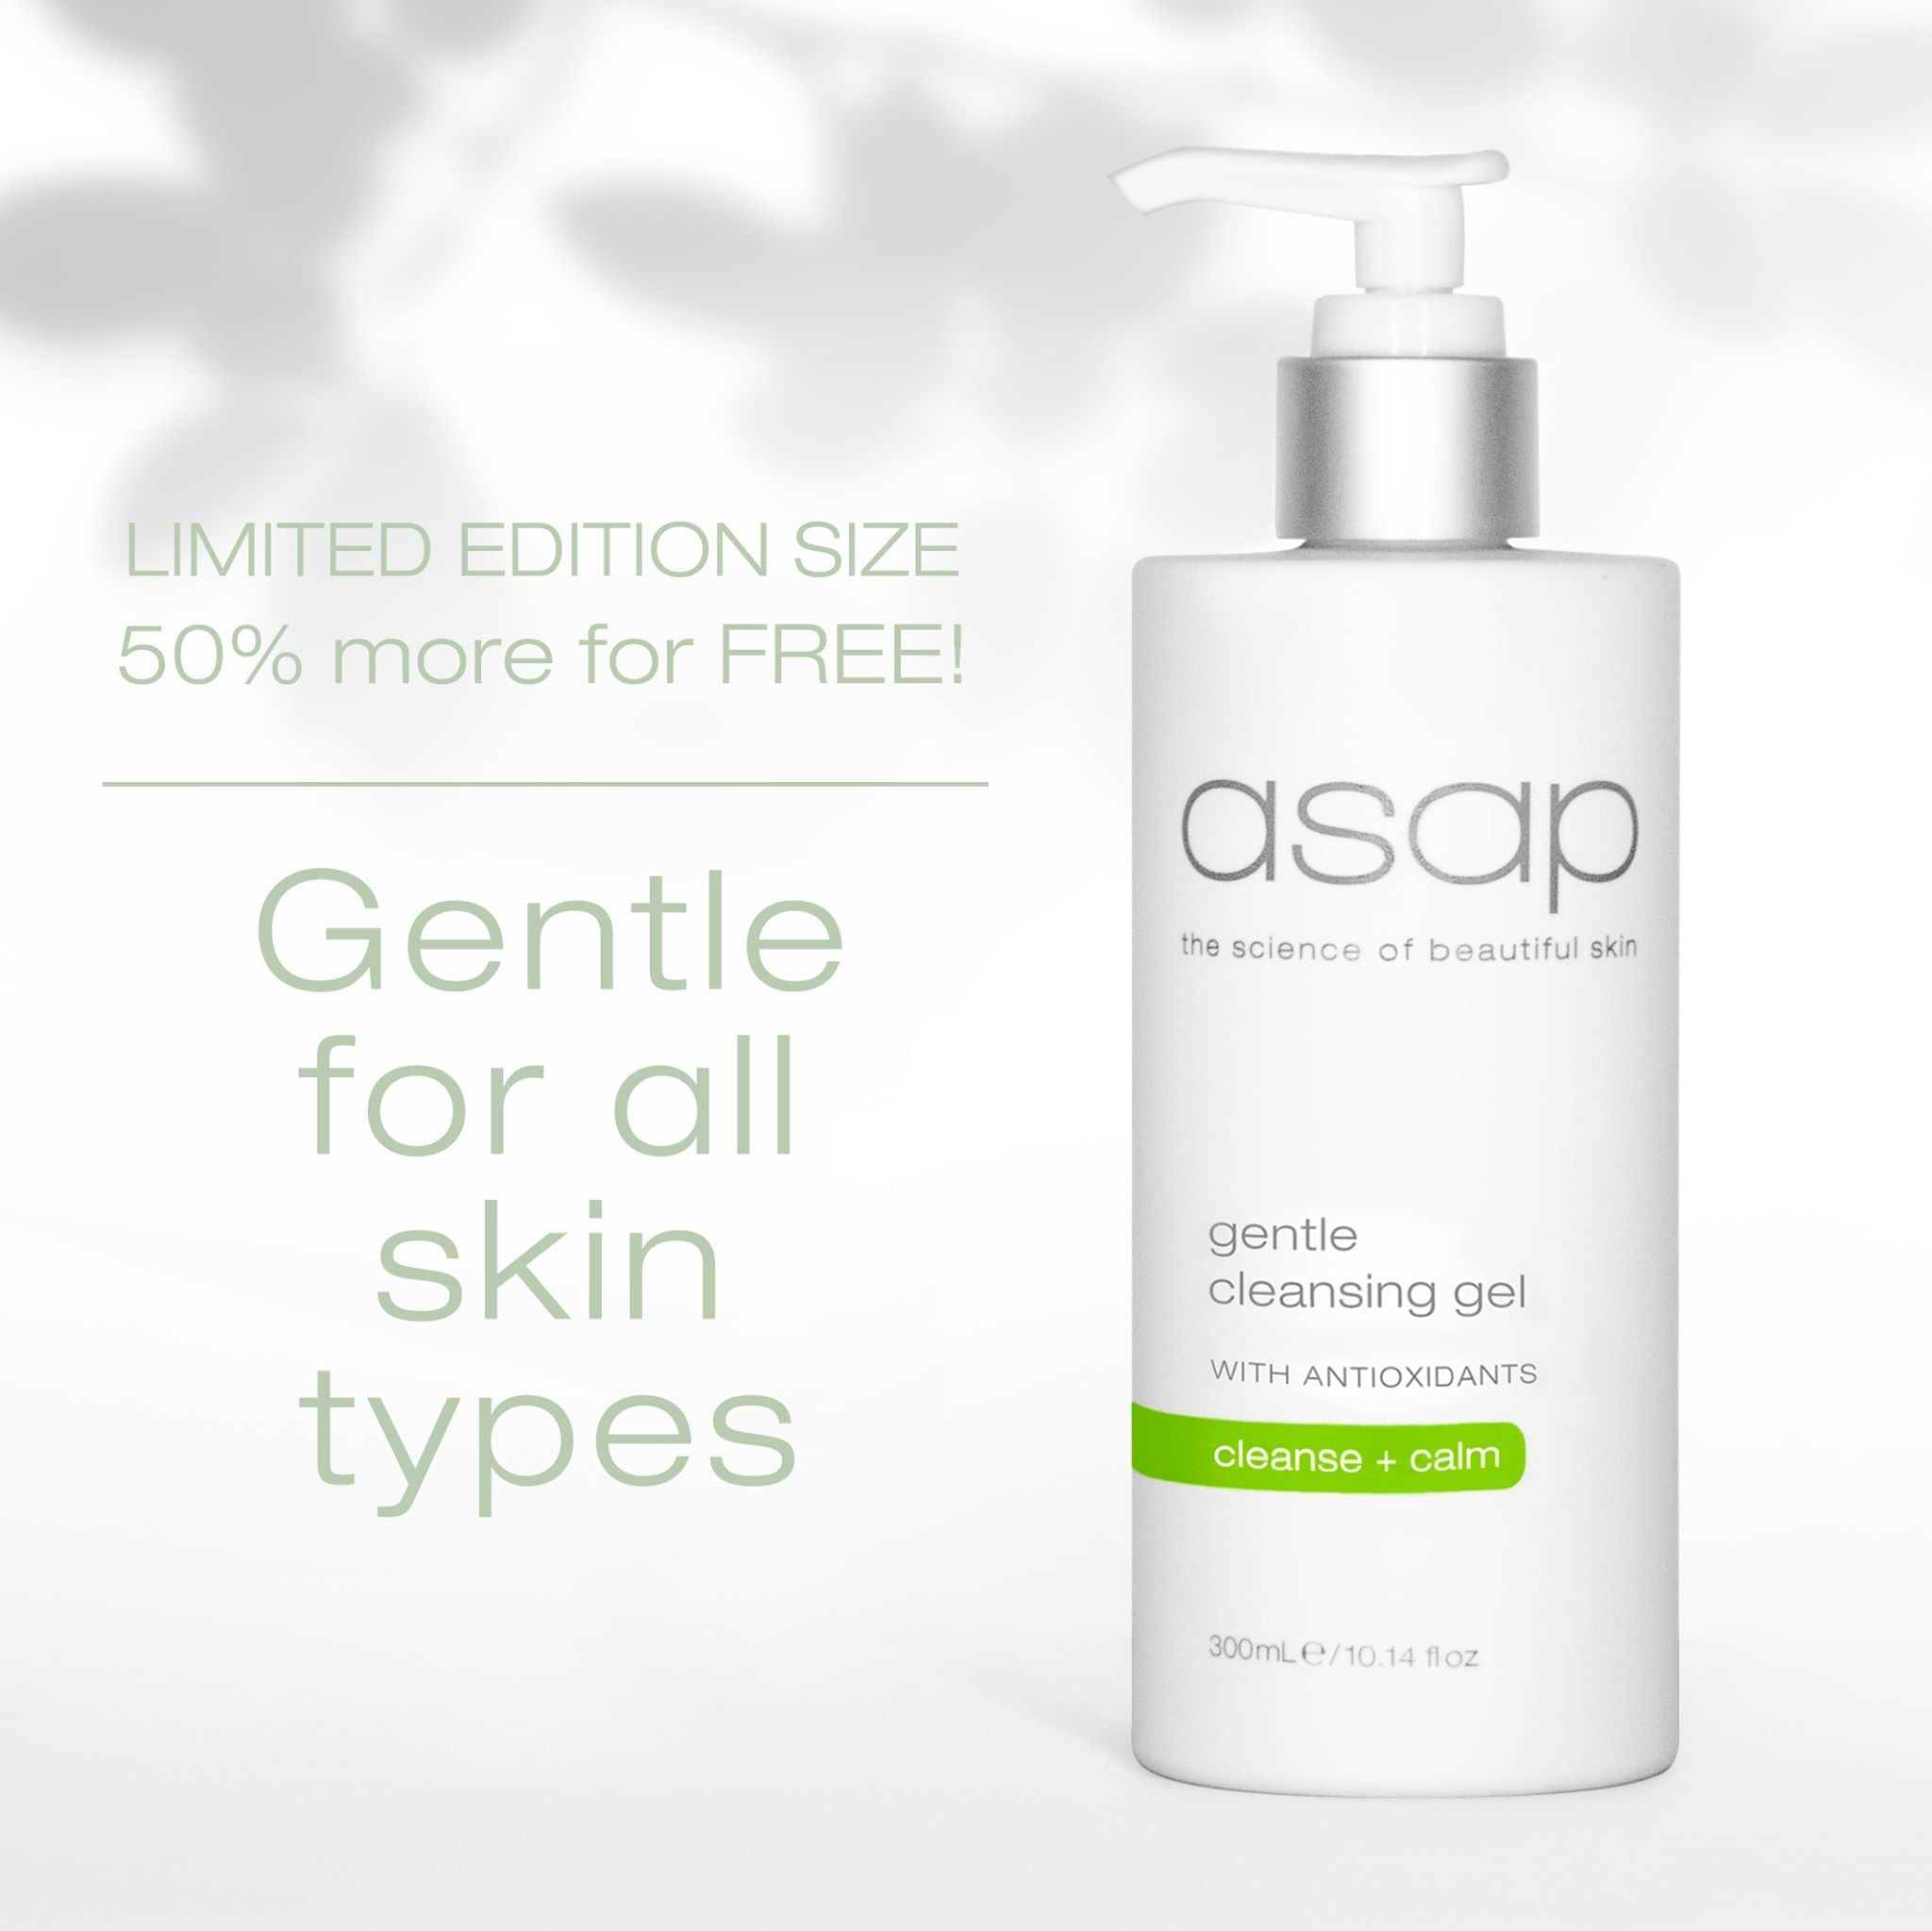 ASAP GENTLE CLEANSING GEL 300ML Limited Edition - Exquisite Laser Clinic